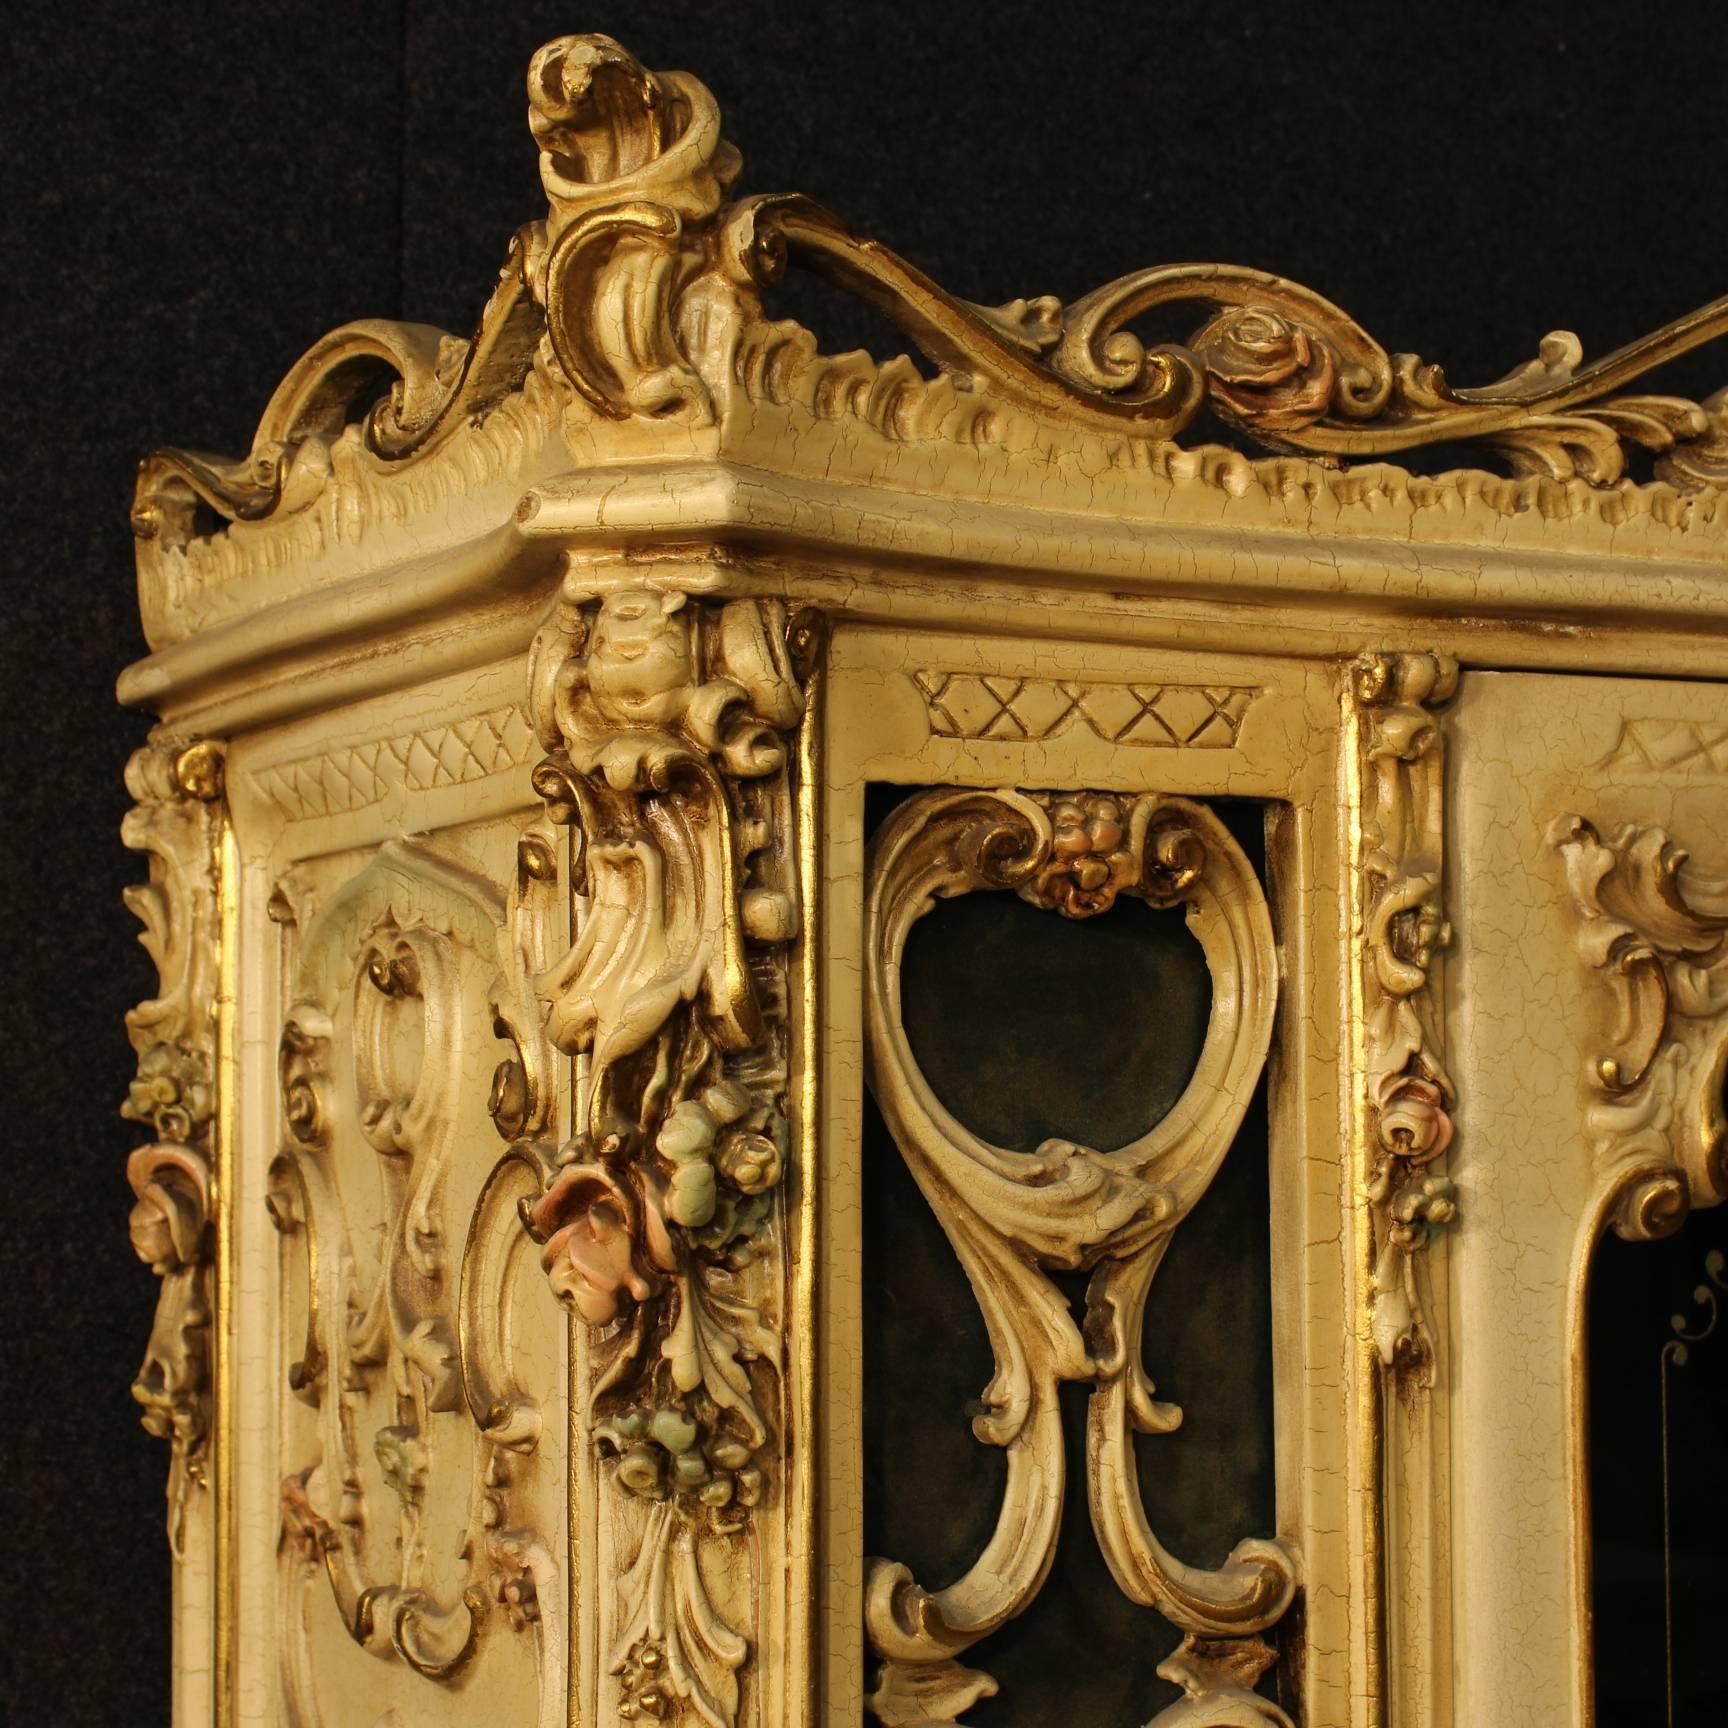 Italian 20th Century Venetian Lacquered and Gilded Showcase